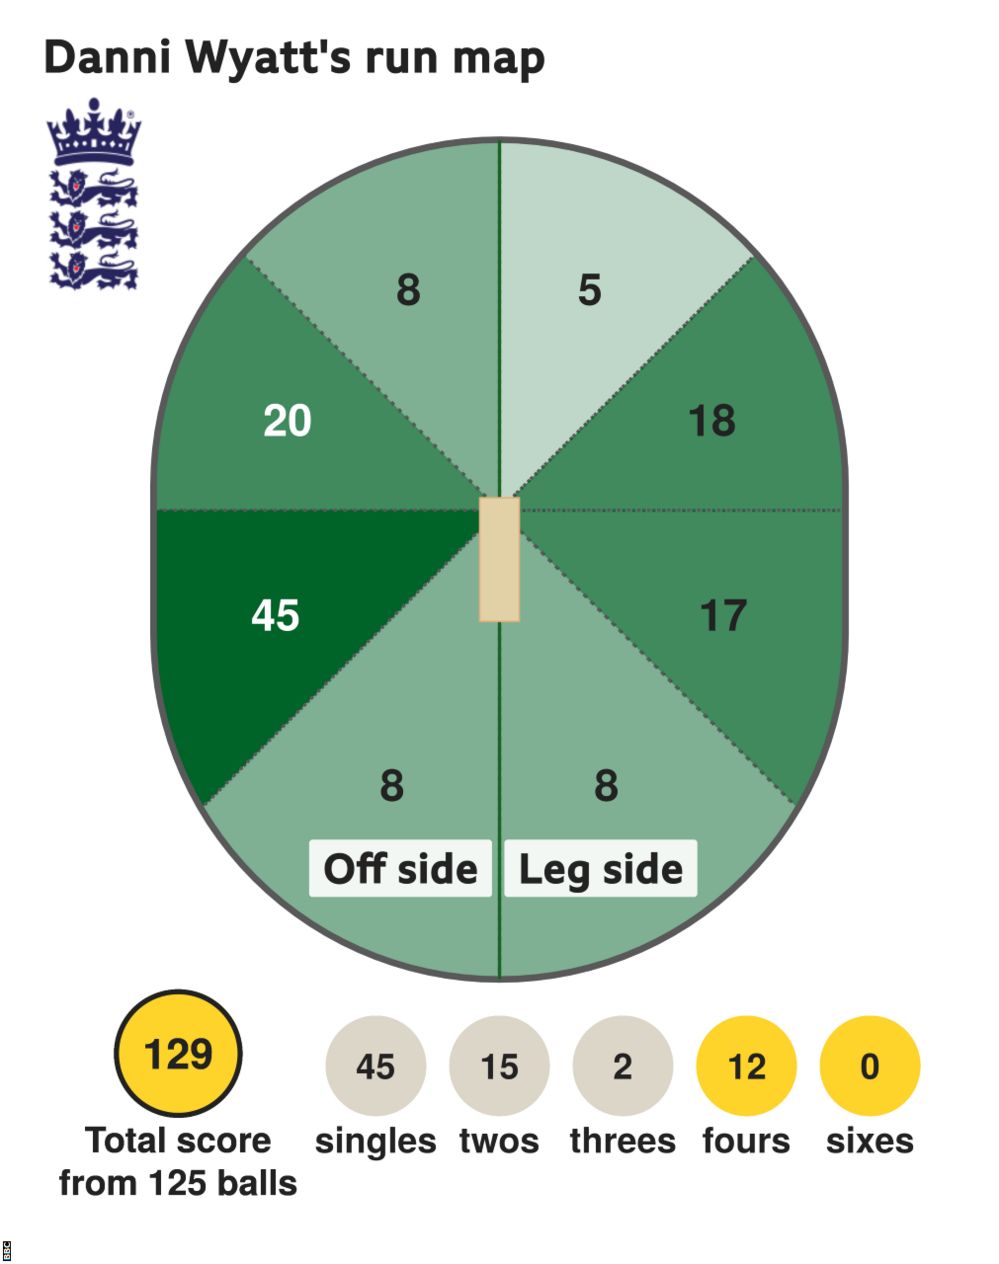 The run map shows Danni Wyatt scored 129 with 12 fours, 2 threes, 15 twos, and 45 singles for England Women